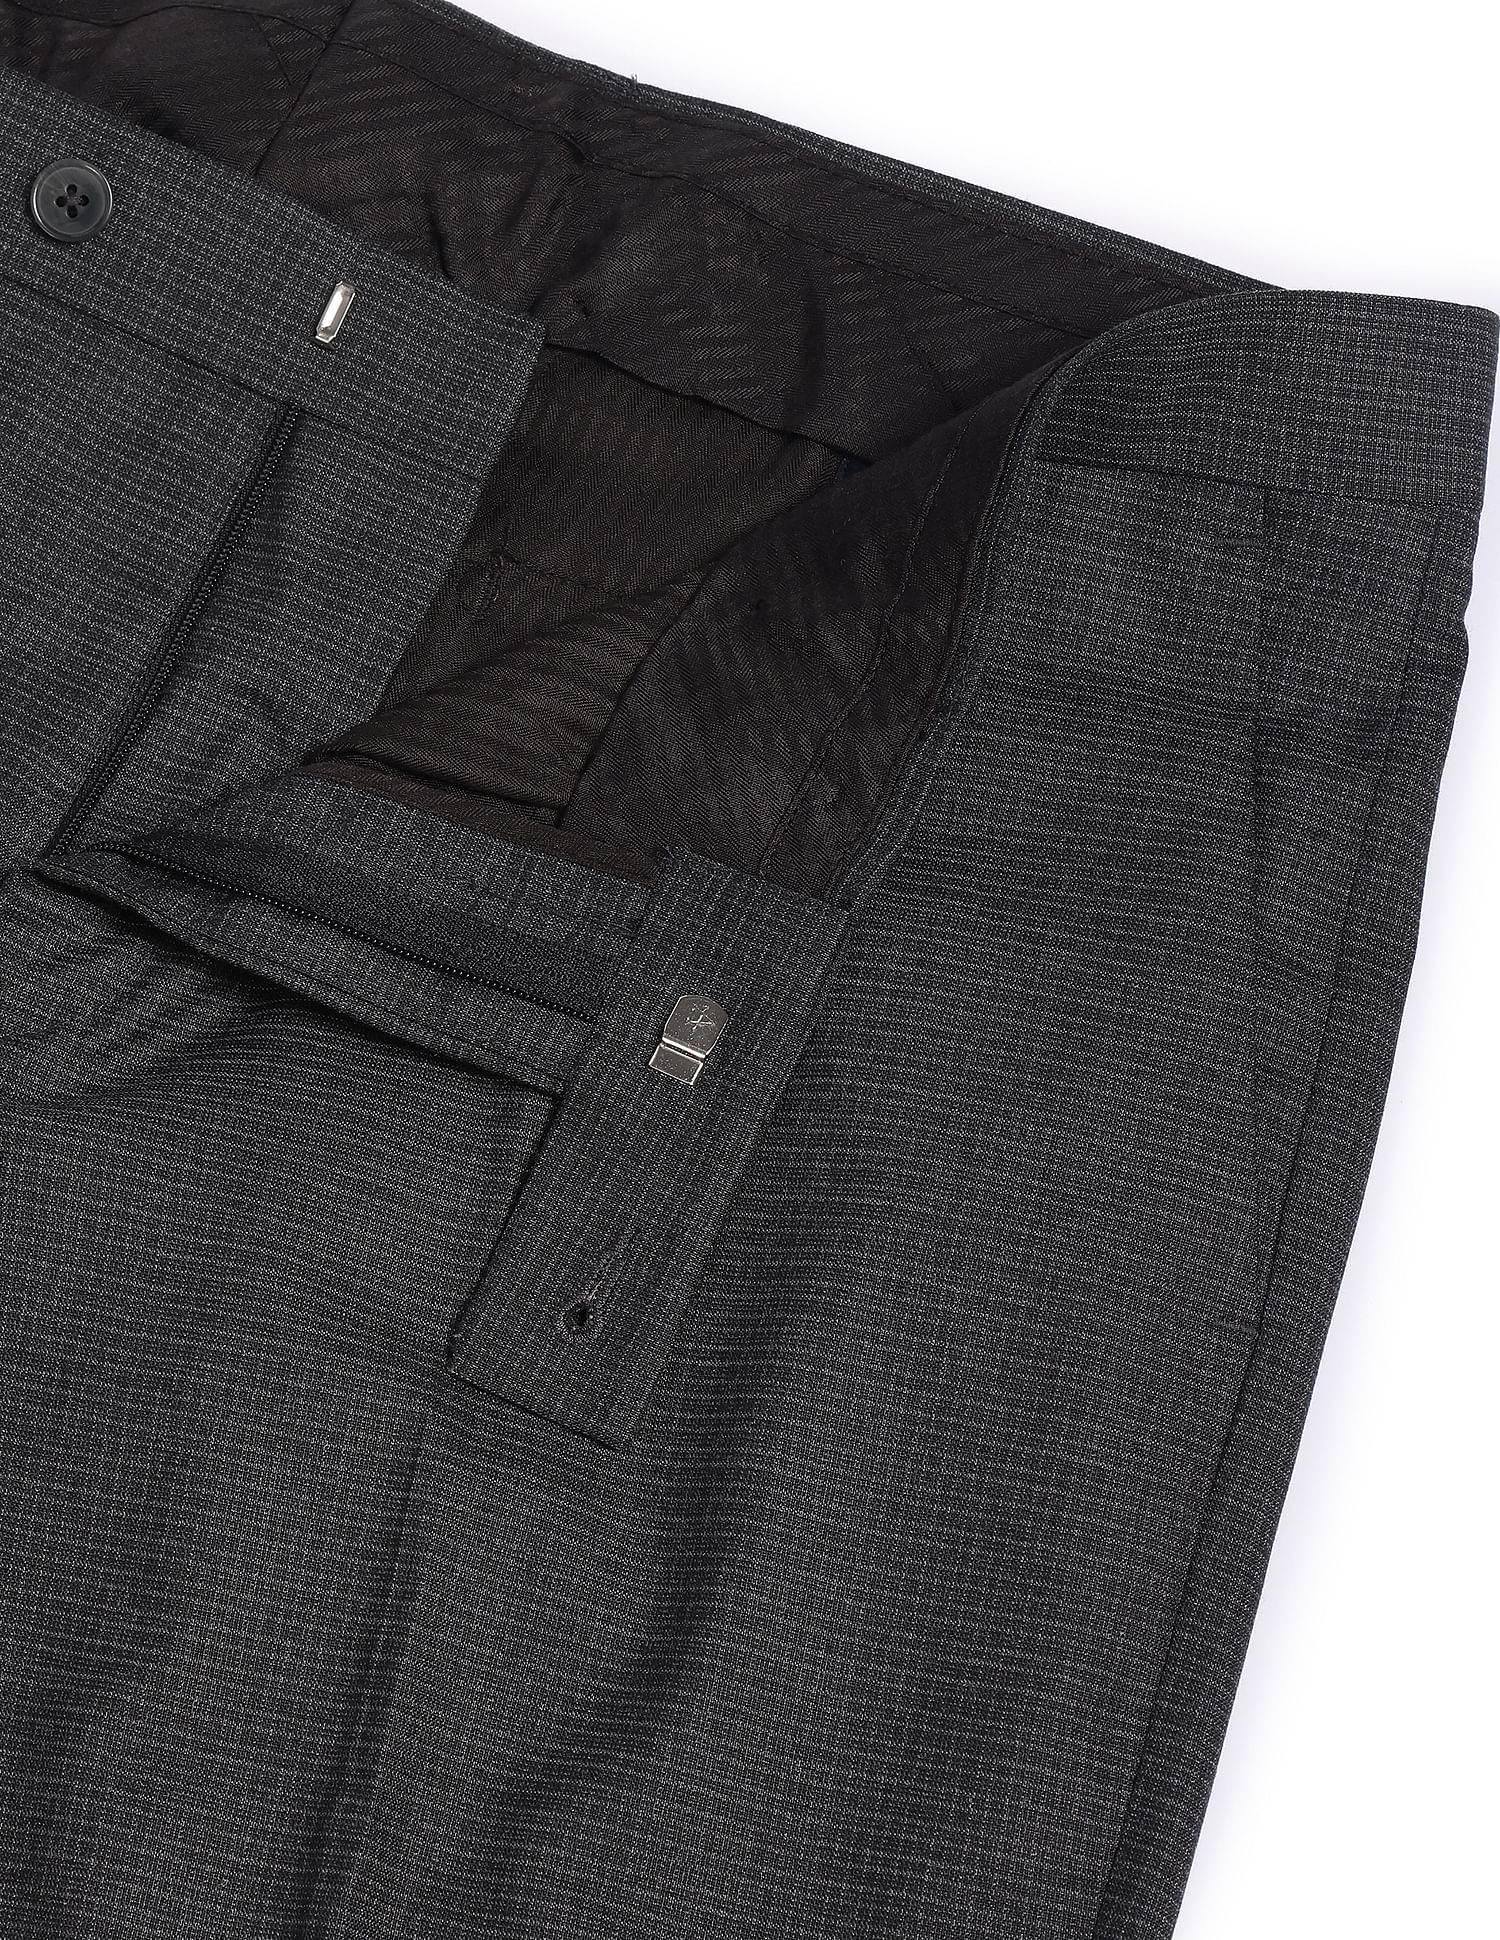 Dark grey wool suit trousers with micro polka dots